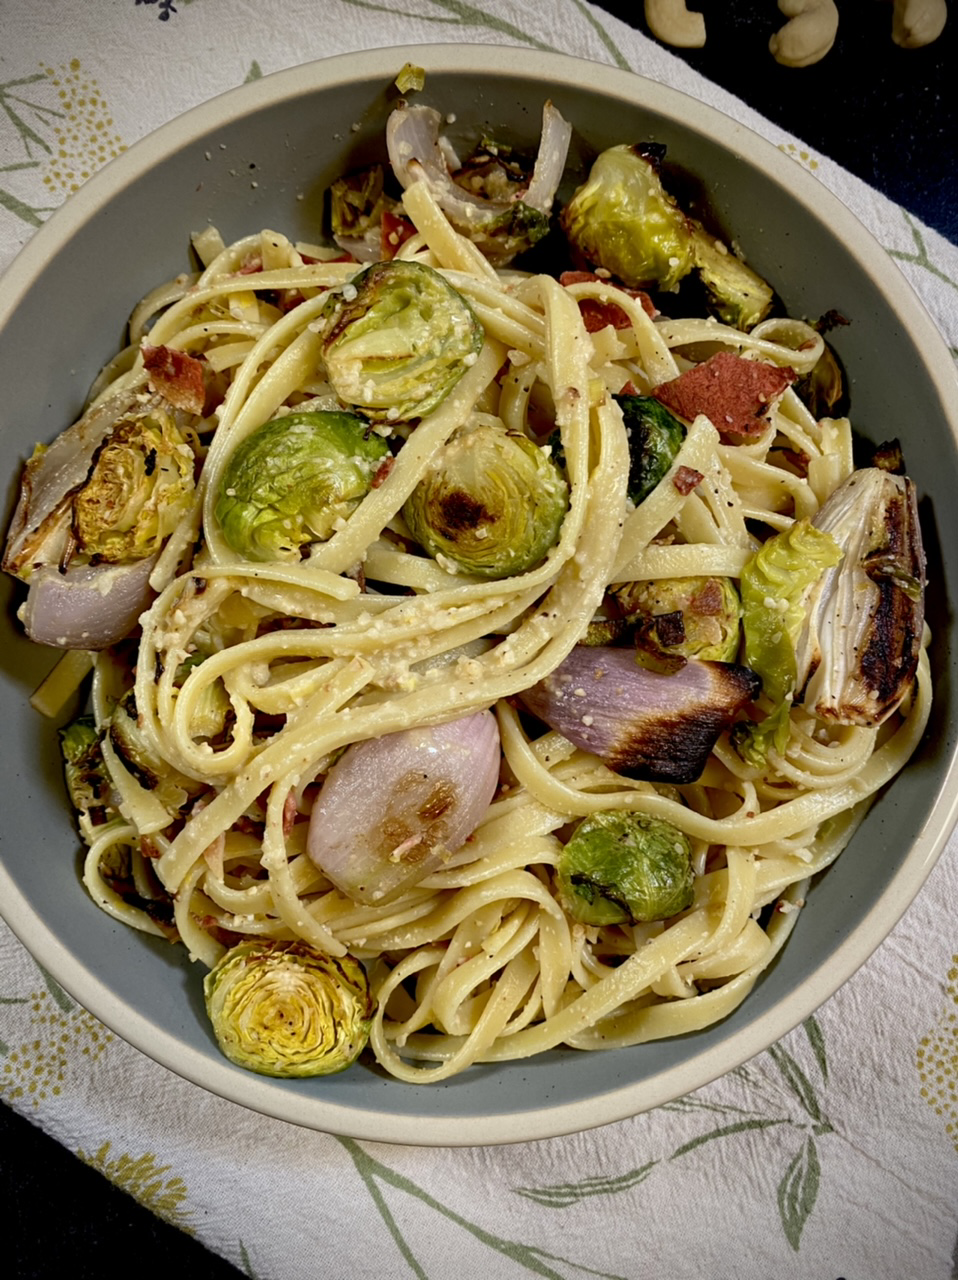 2FE1DA17 7AC6 4F16 9EE4 73C7BBE9D2E9 - Nooch Fettuccini Alfredo with Roasted Shallots &  Brussel Sprouts